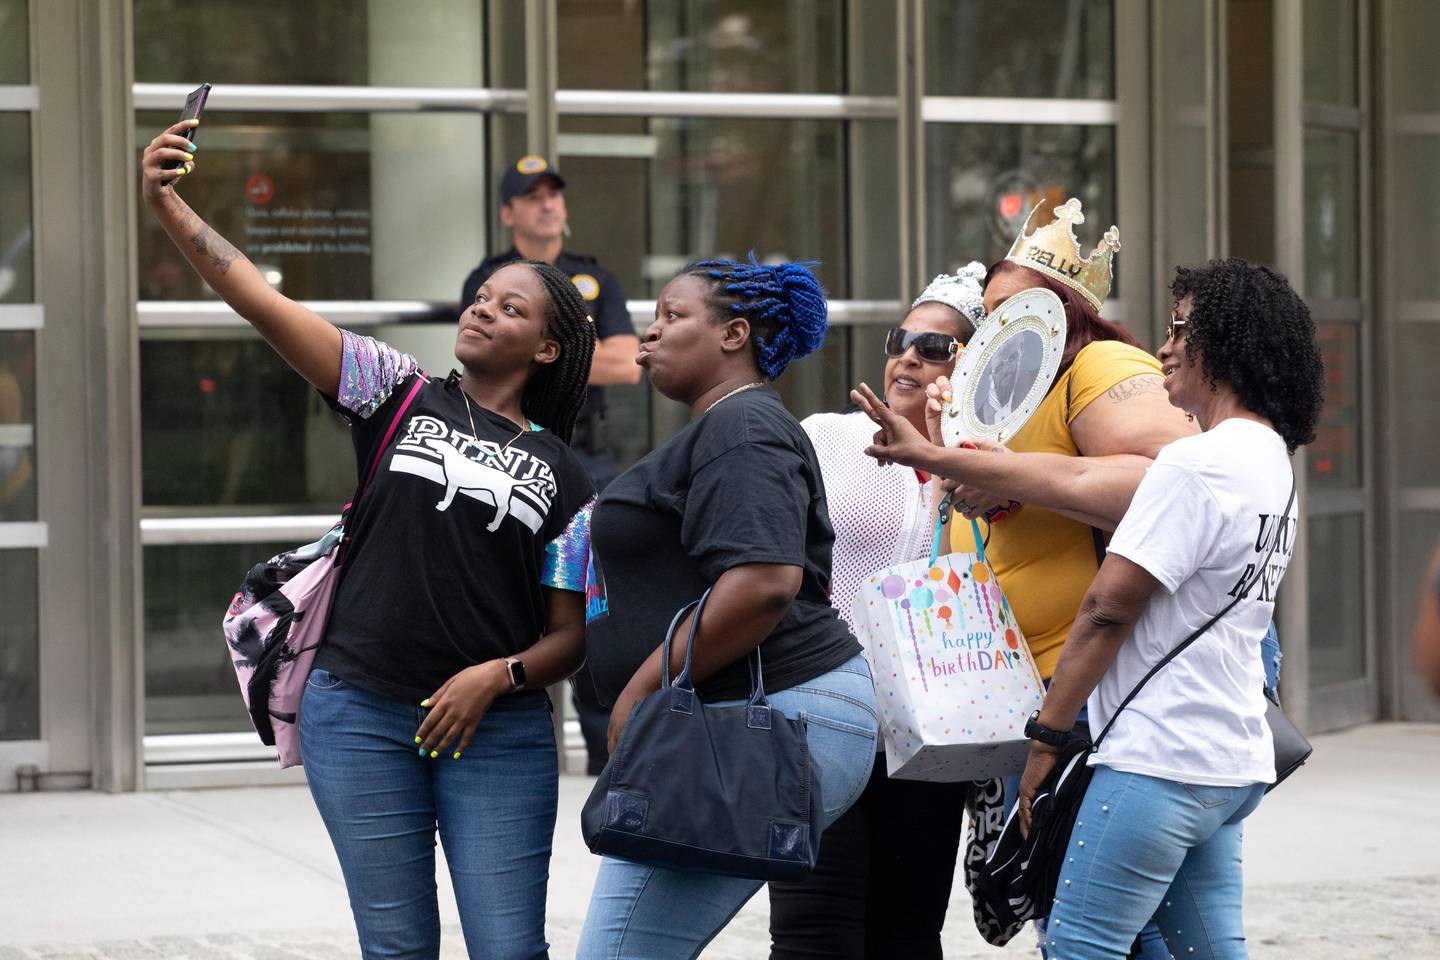 Supporters of R&B performer R. Kelly pose for a selfie outside federal court in Brooklyn before his hearing, Friday, Aug. 2, 2019, in New York. Kelly faces an arraignment on charges he sexually abused women and girls. (AP Photo/Mark Lennihan)